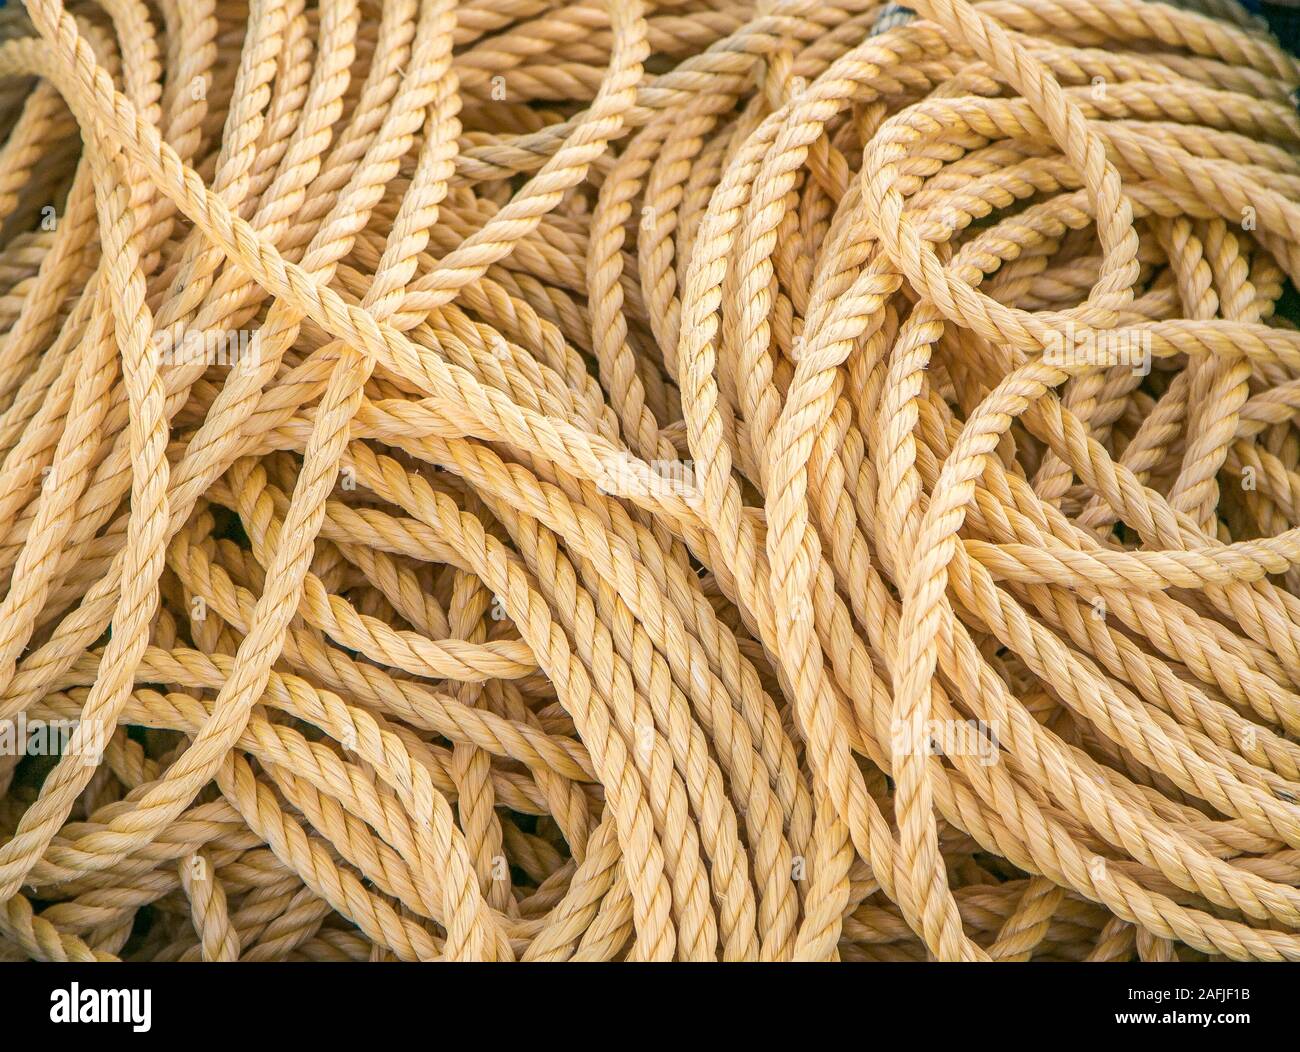 Maritime rope lying in disorderly manner, background. Stock Photo